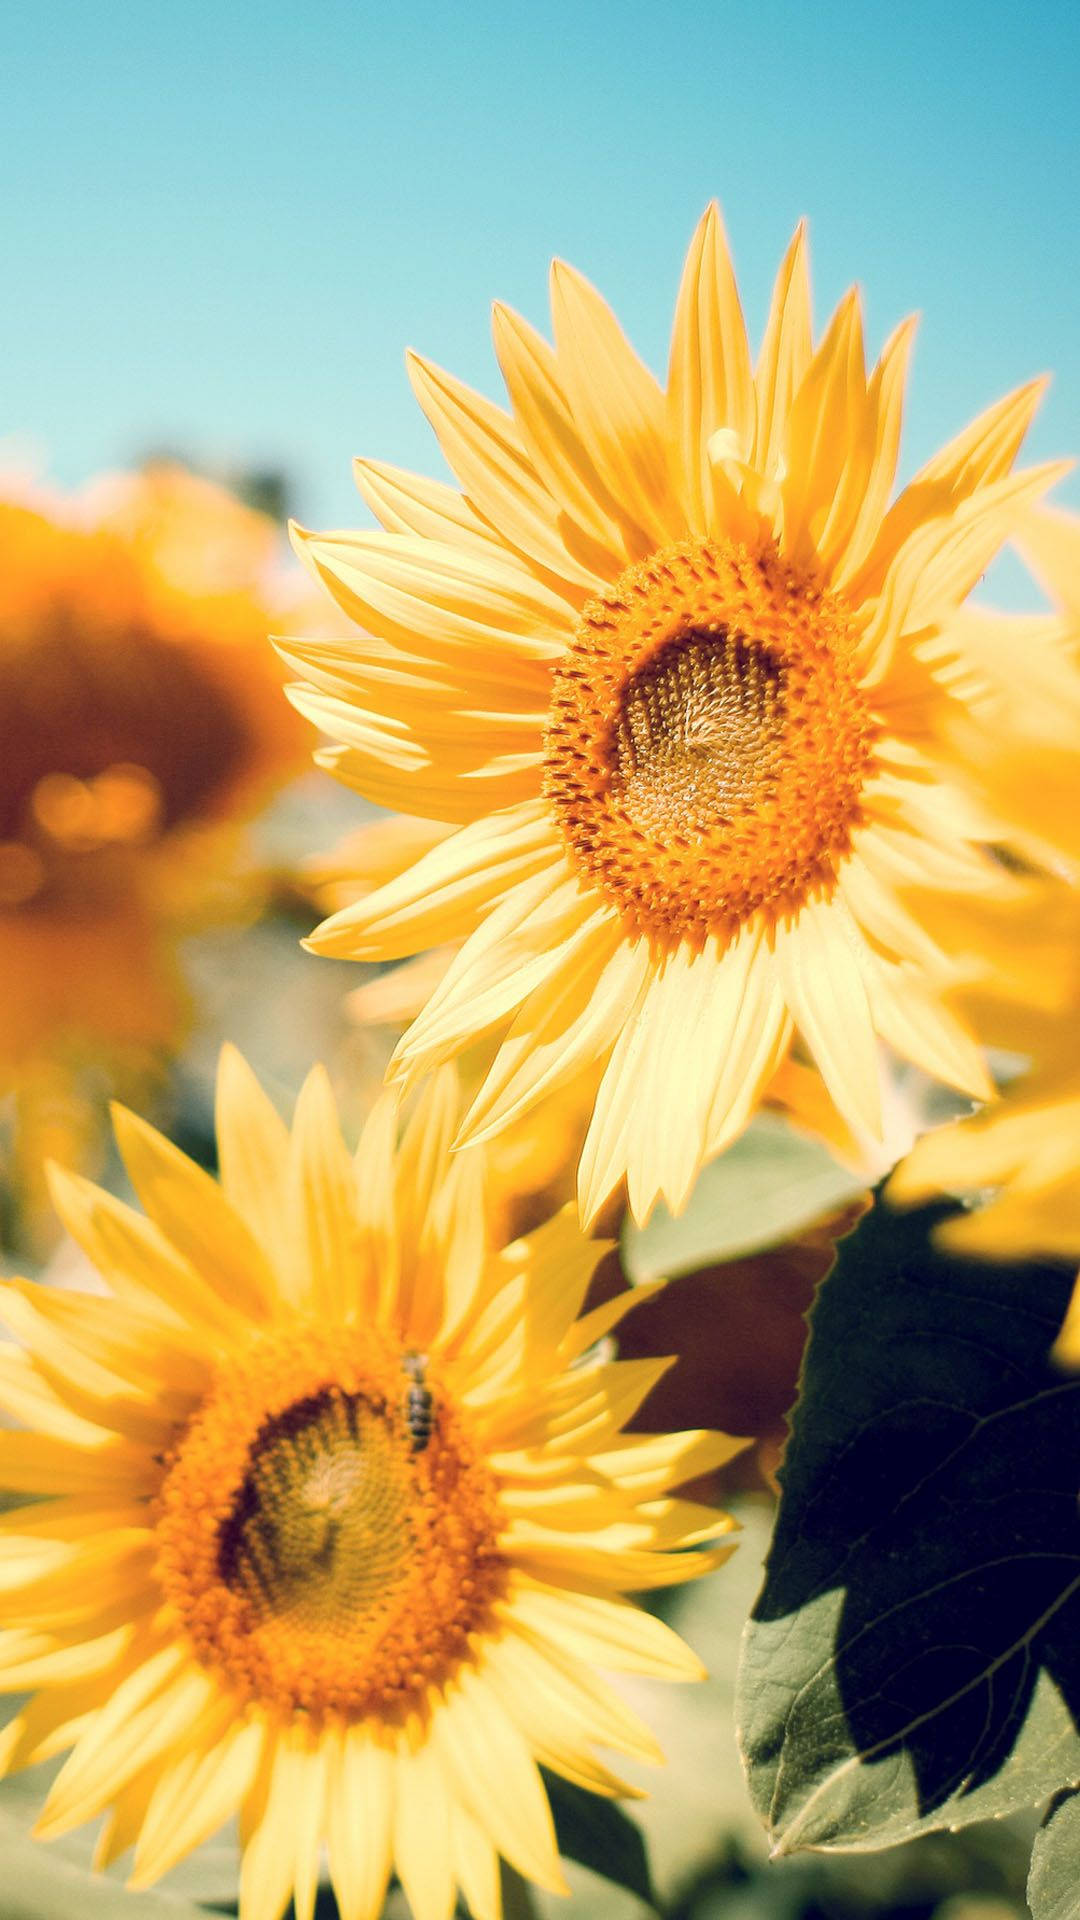 Free and customizable wallpaper sunflower templates